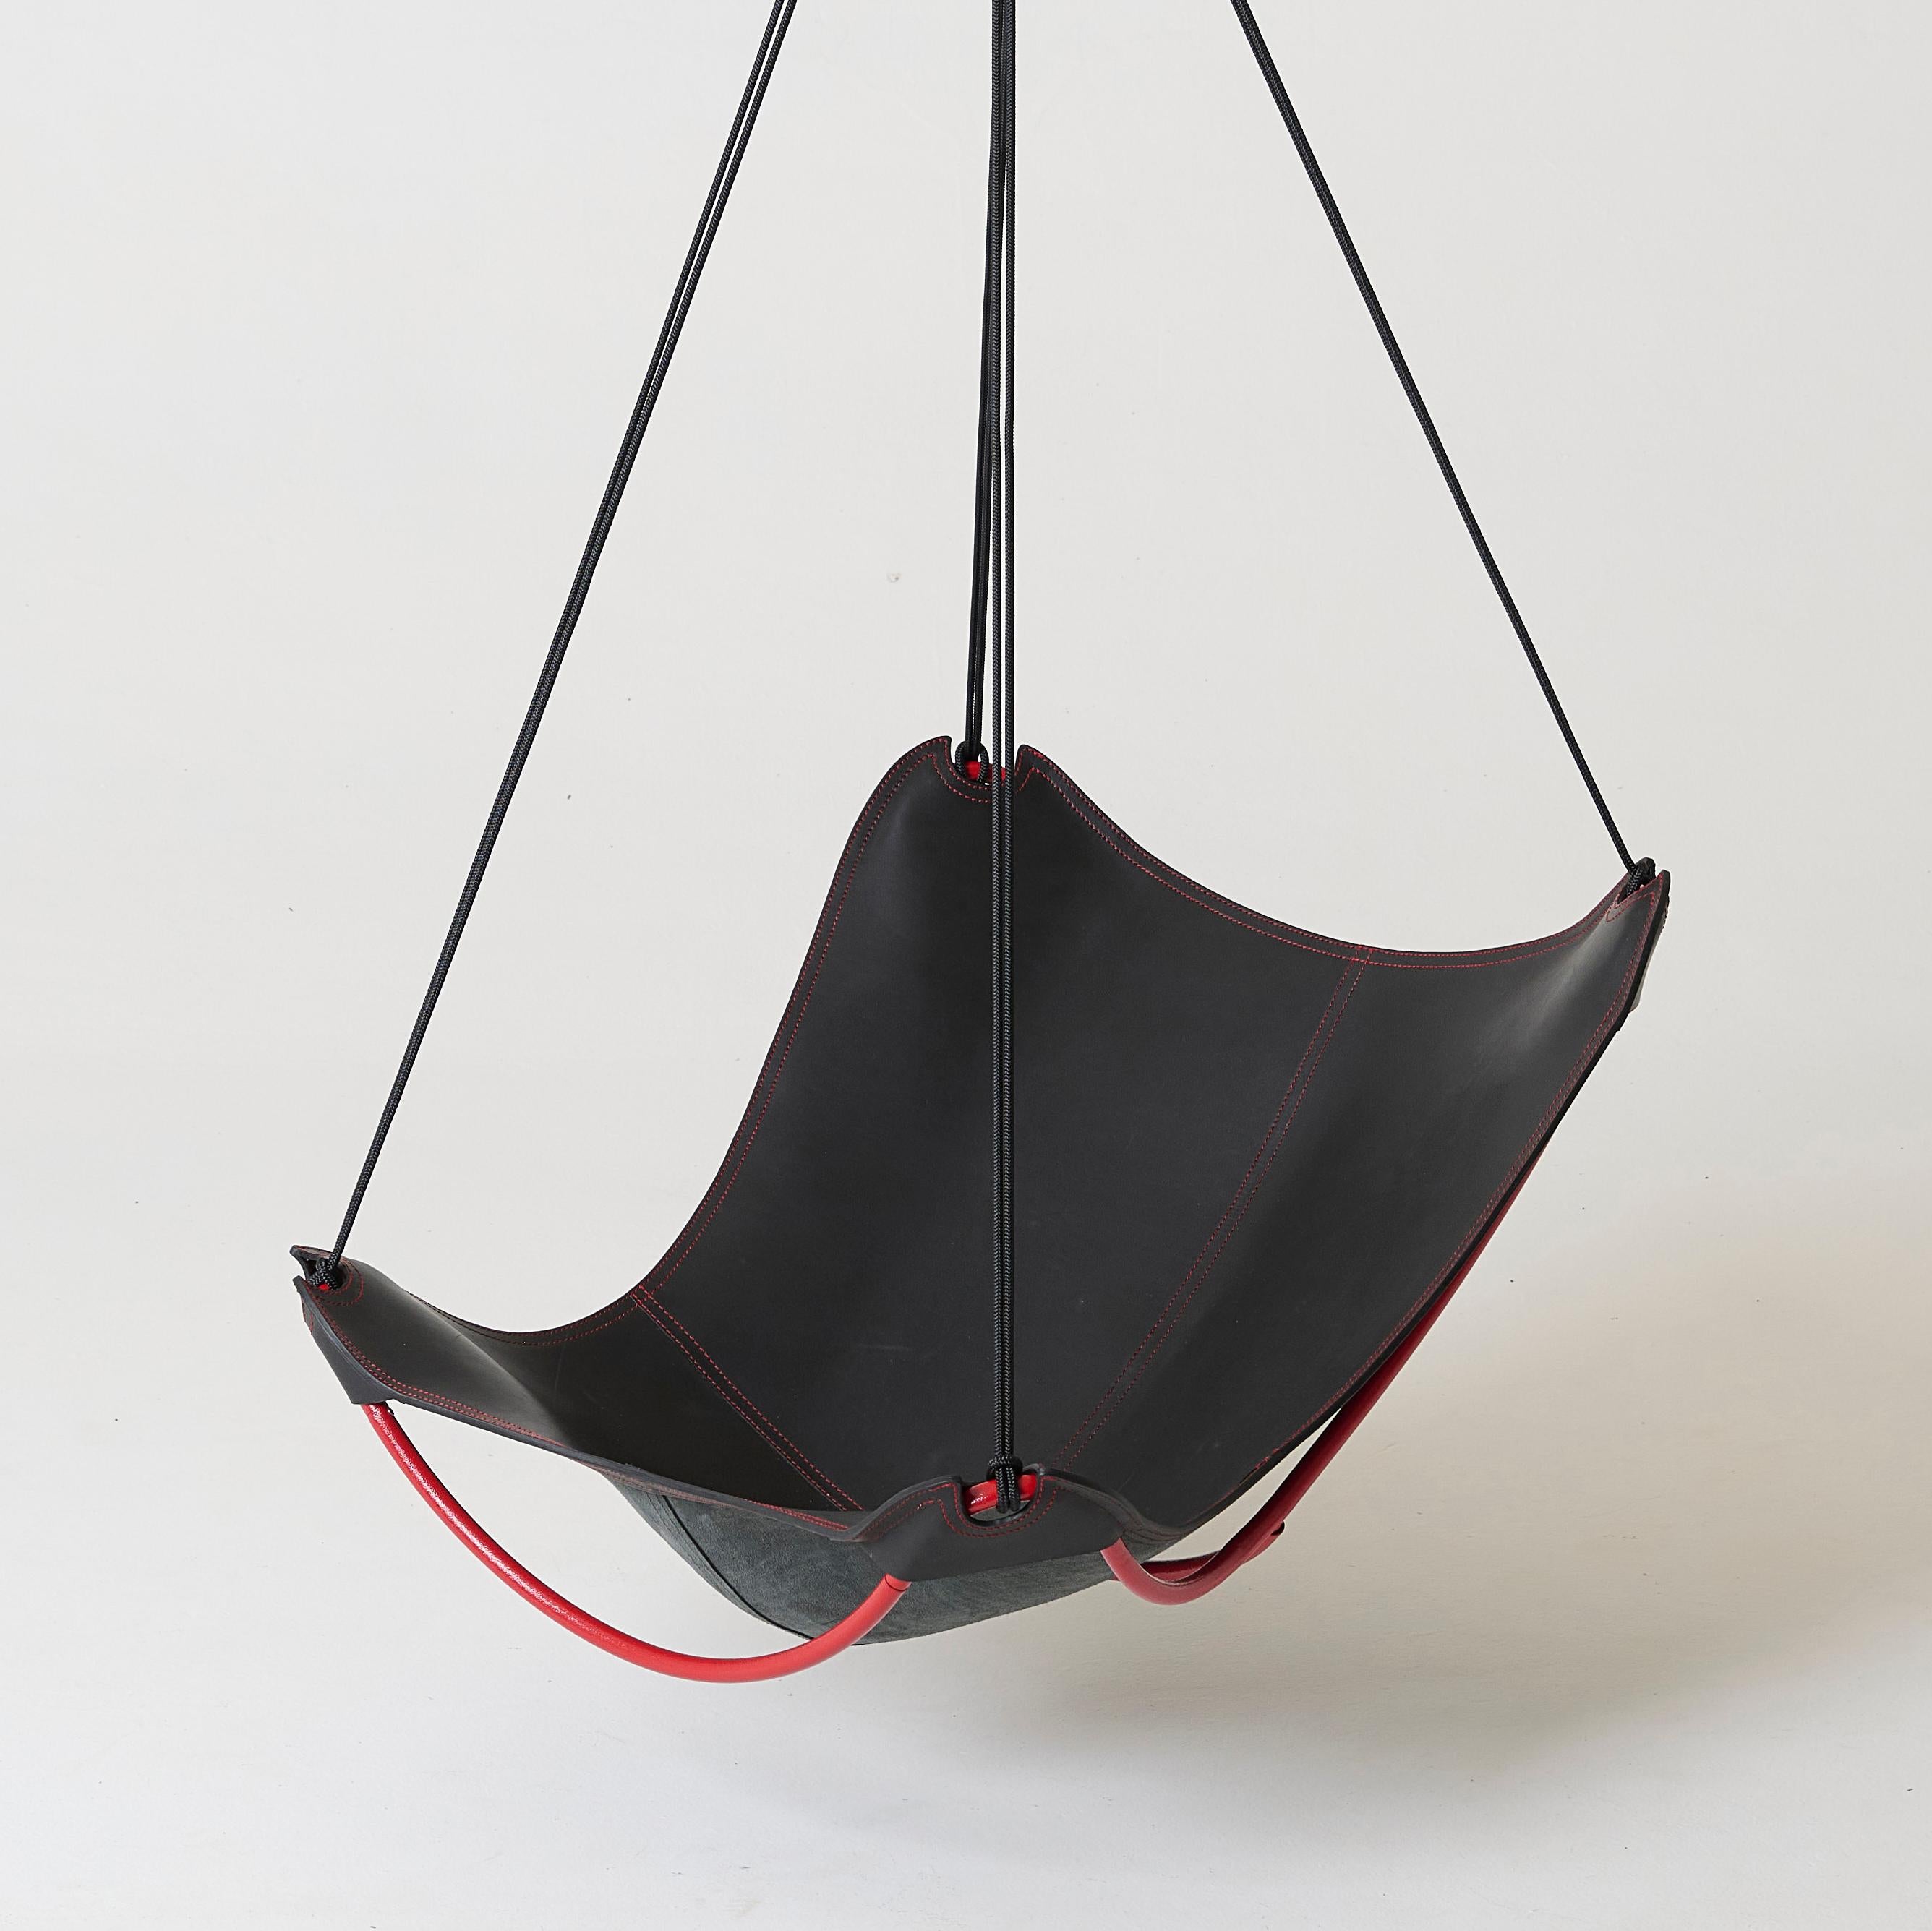 Contemporary Modern Black Leather ButterFLY Hanging Swing Chair with Red Detail For Sale